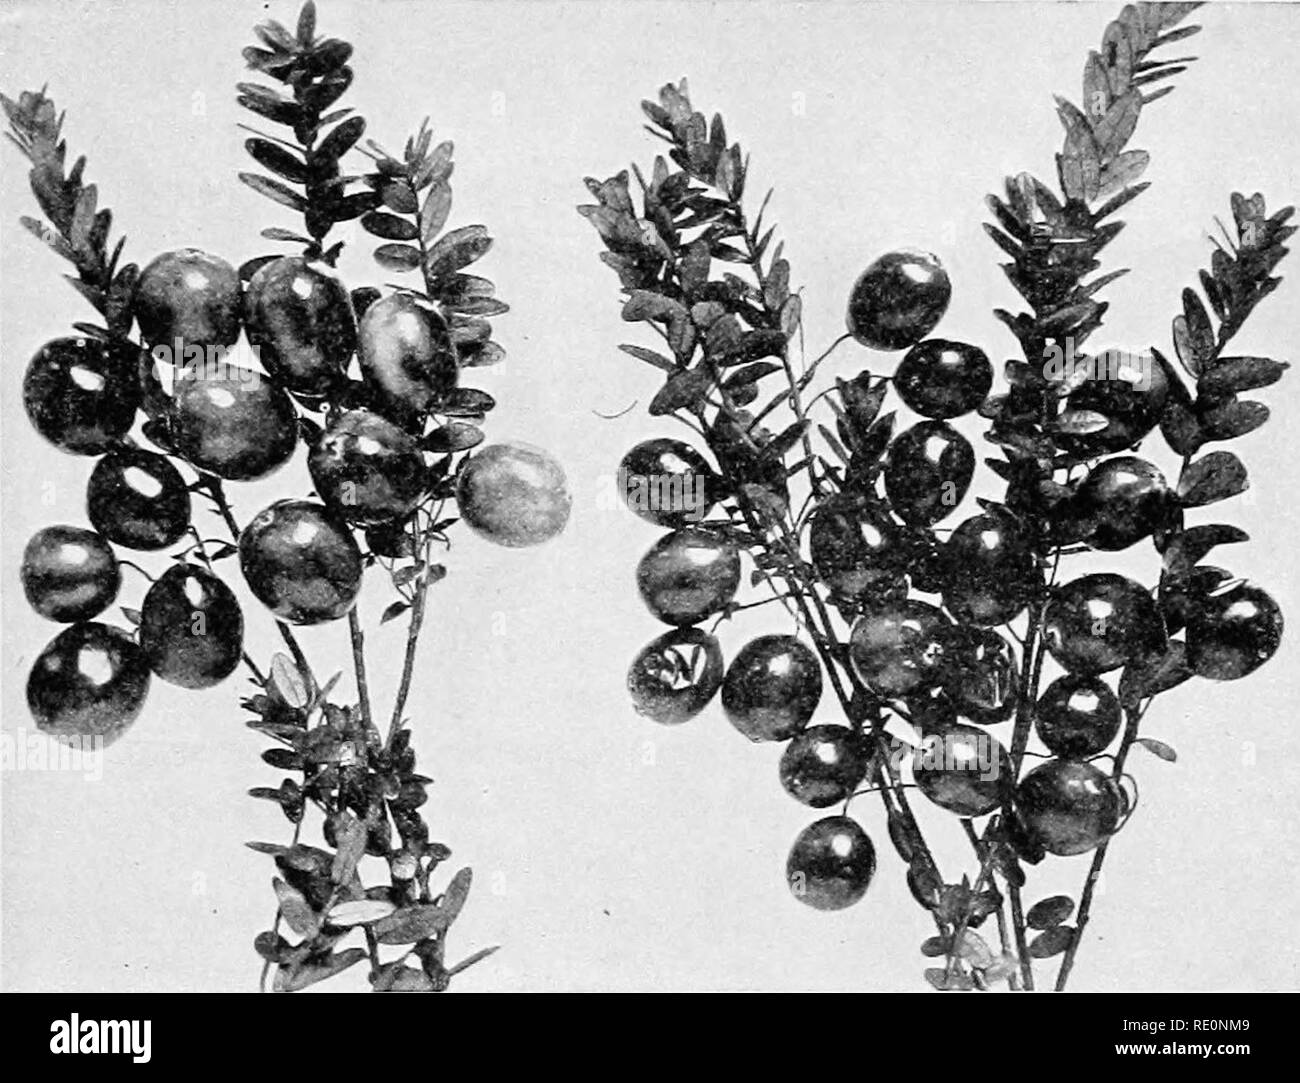 . College botany; structure, physiology and economics of plants. Botany. DICOTYLEDONOUS PLANTS 373 AscLEPiADACE,^ (Milkweed Family).— Herbs, with milky juices; flowers perfect; pollen in waxy or gi-anular masses; fruit a large, follicular pod containing seeds frequently with feathery development for scattering. This family is represented by the common milkweeds (Asclepias). CoxvoLVULACE^ (Morning-glory Family).—Herbs, usually. Fig. 216.—Cranberries. climbing or trailing; leaves alternate; inflorescence solitary or in one-sided scorpioid cymes, axillary or terminal; flowers per- fect, usually r Stock Photo